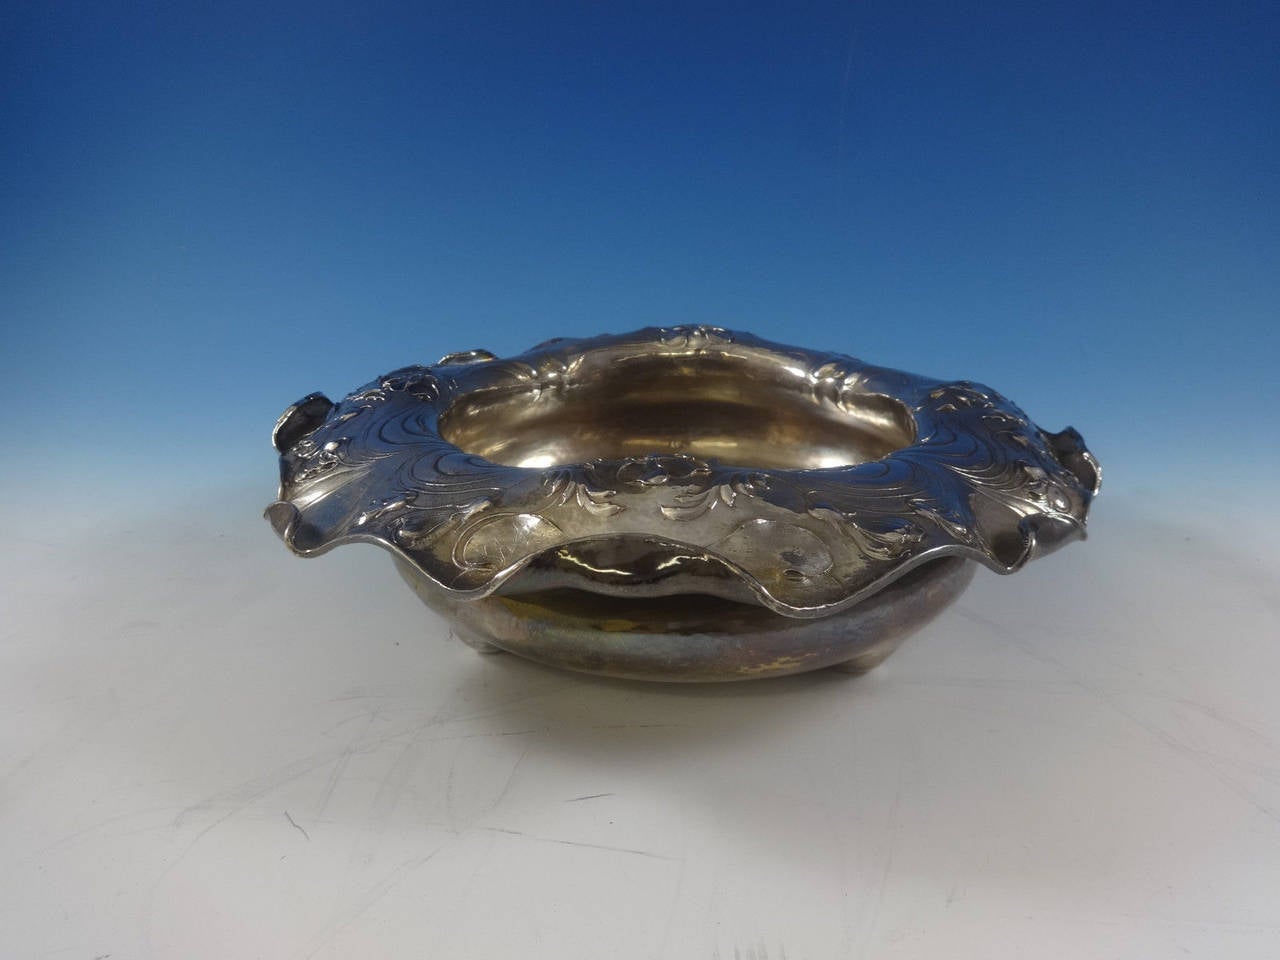 Martele by Gorham
 Art Nouveau Martele by Gorham .950 sterling silver round salad or berry bowl with beautiful floral motif and wide ruffled rim, #FR. It was made in December of 1900, took 23 hours to form, and was hand chased for 58 hours. The hand